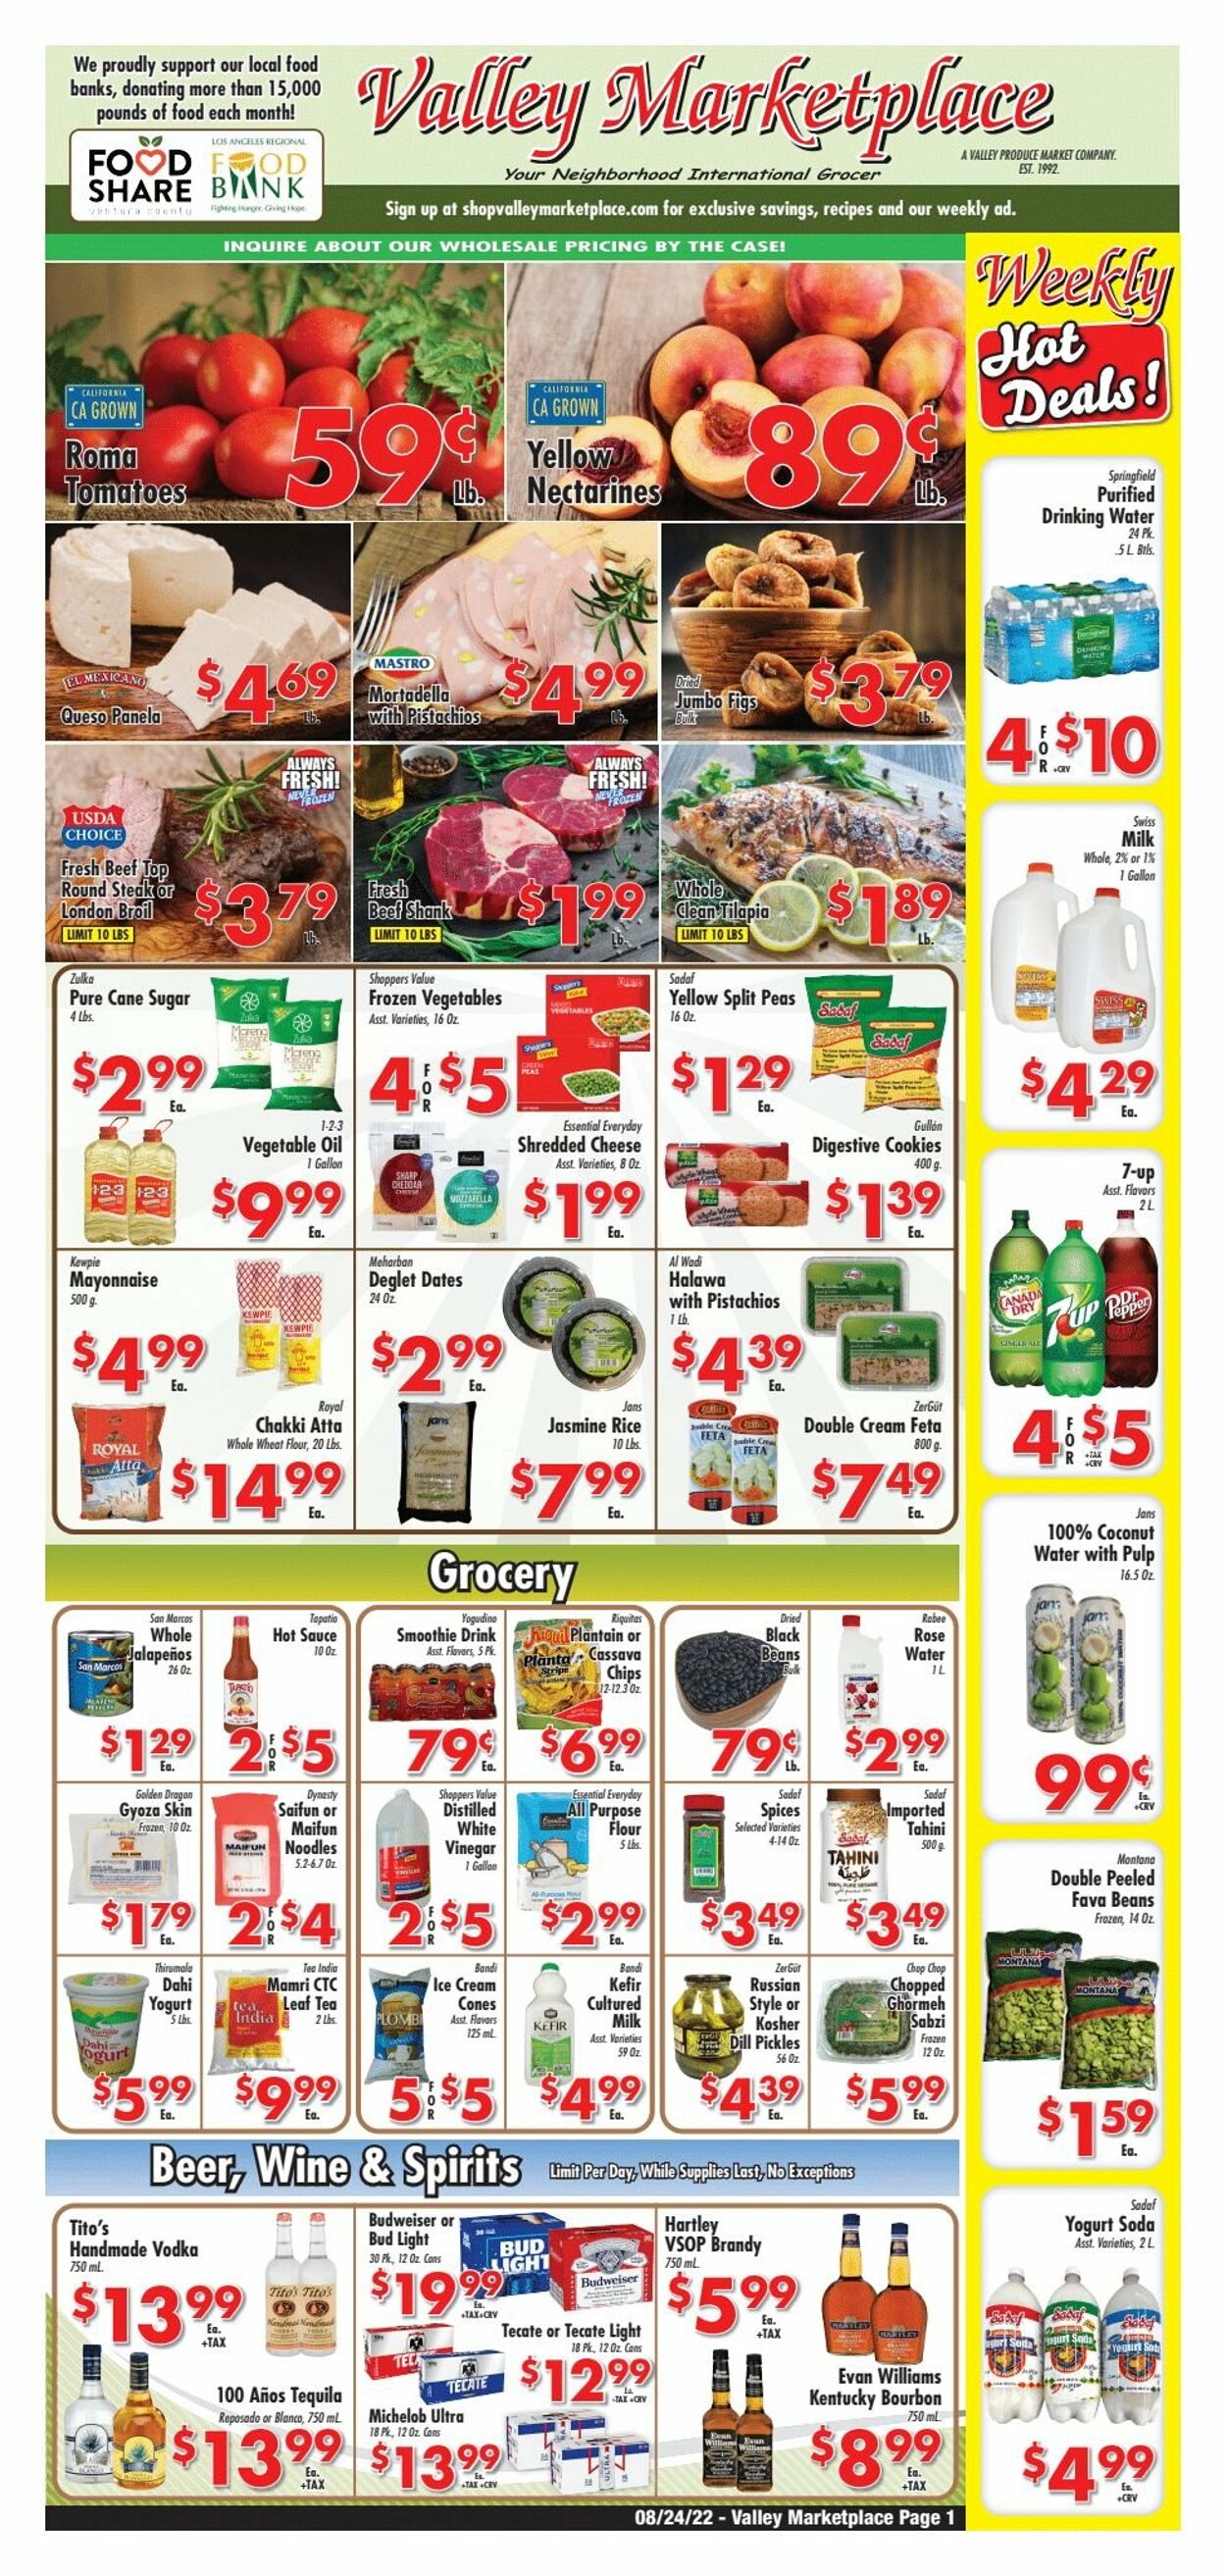 Weekly ad Valley Marketplace 08/24/2022-08/30/2022